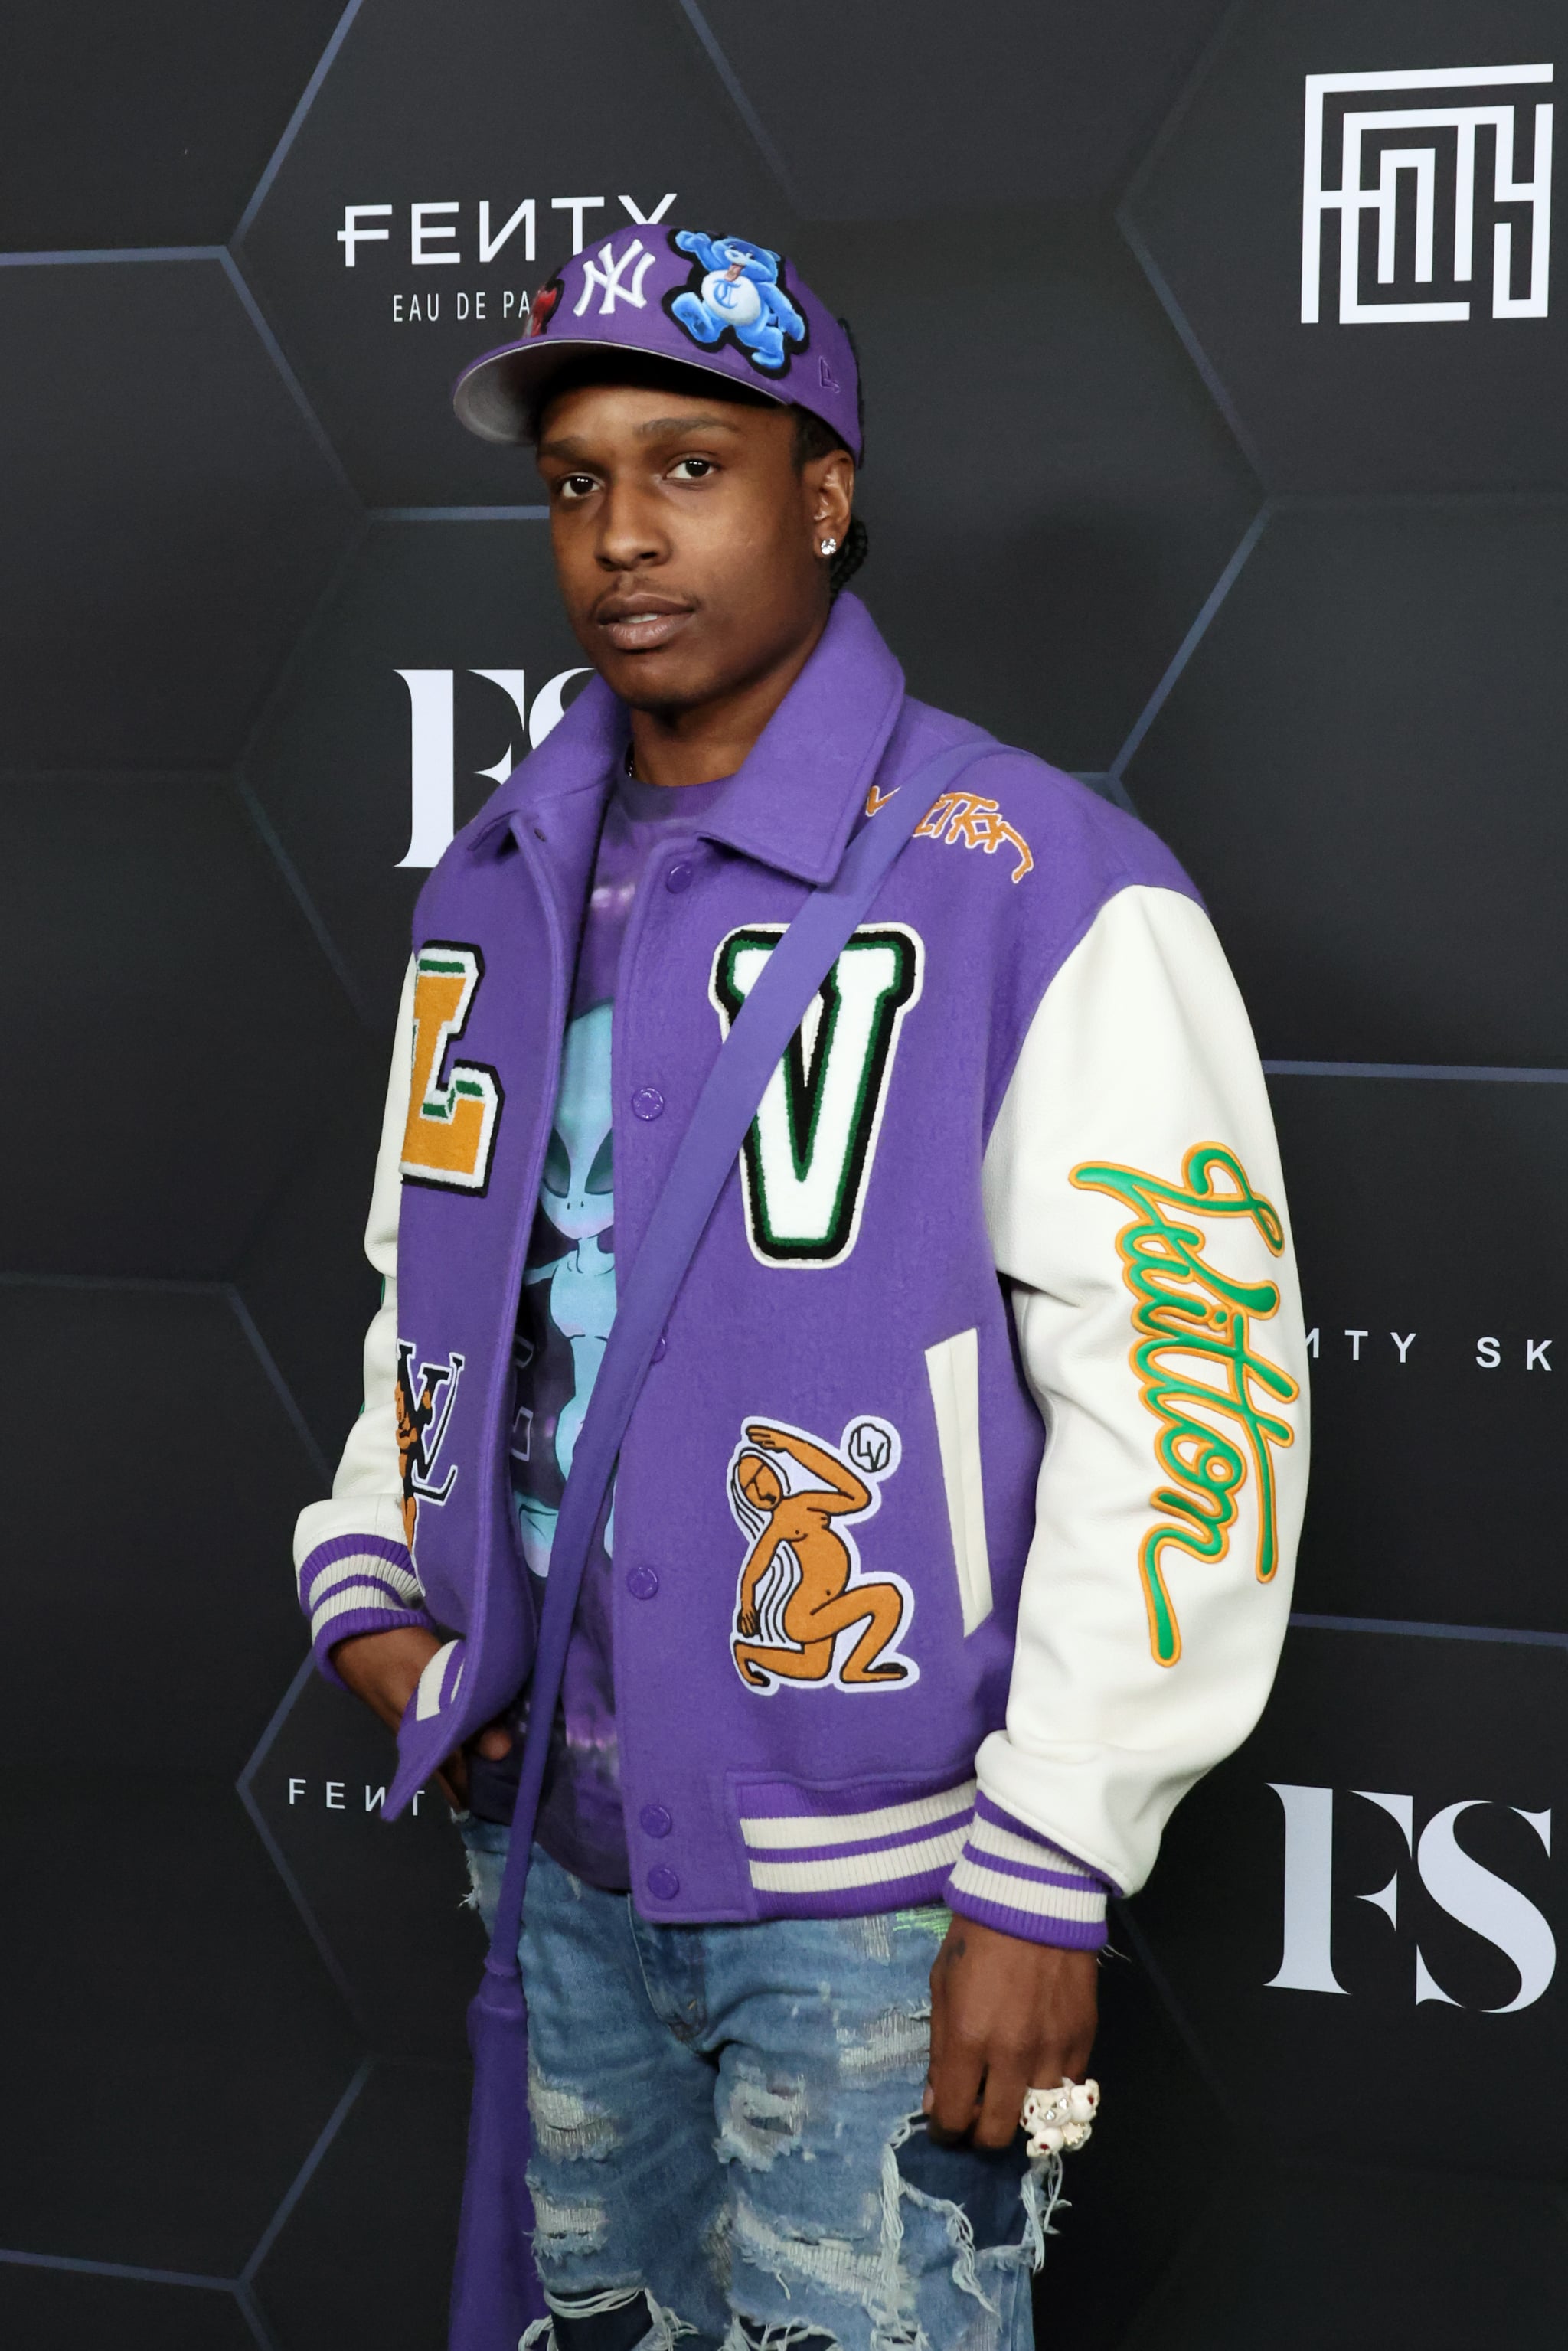 LOS ANGELES, CALIFORNIA - FEBRUARY 11: ASAP Rocky poses for a picture as Rihanna celebrates her beauty brands Fenty Beauty and Fenty Skinat Goya Studios on February 11, 2022 in Los Angeles, California. (Photo by Mike Coppola/Getty Images)